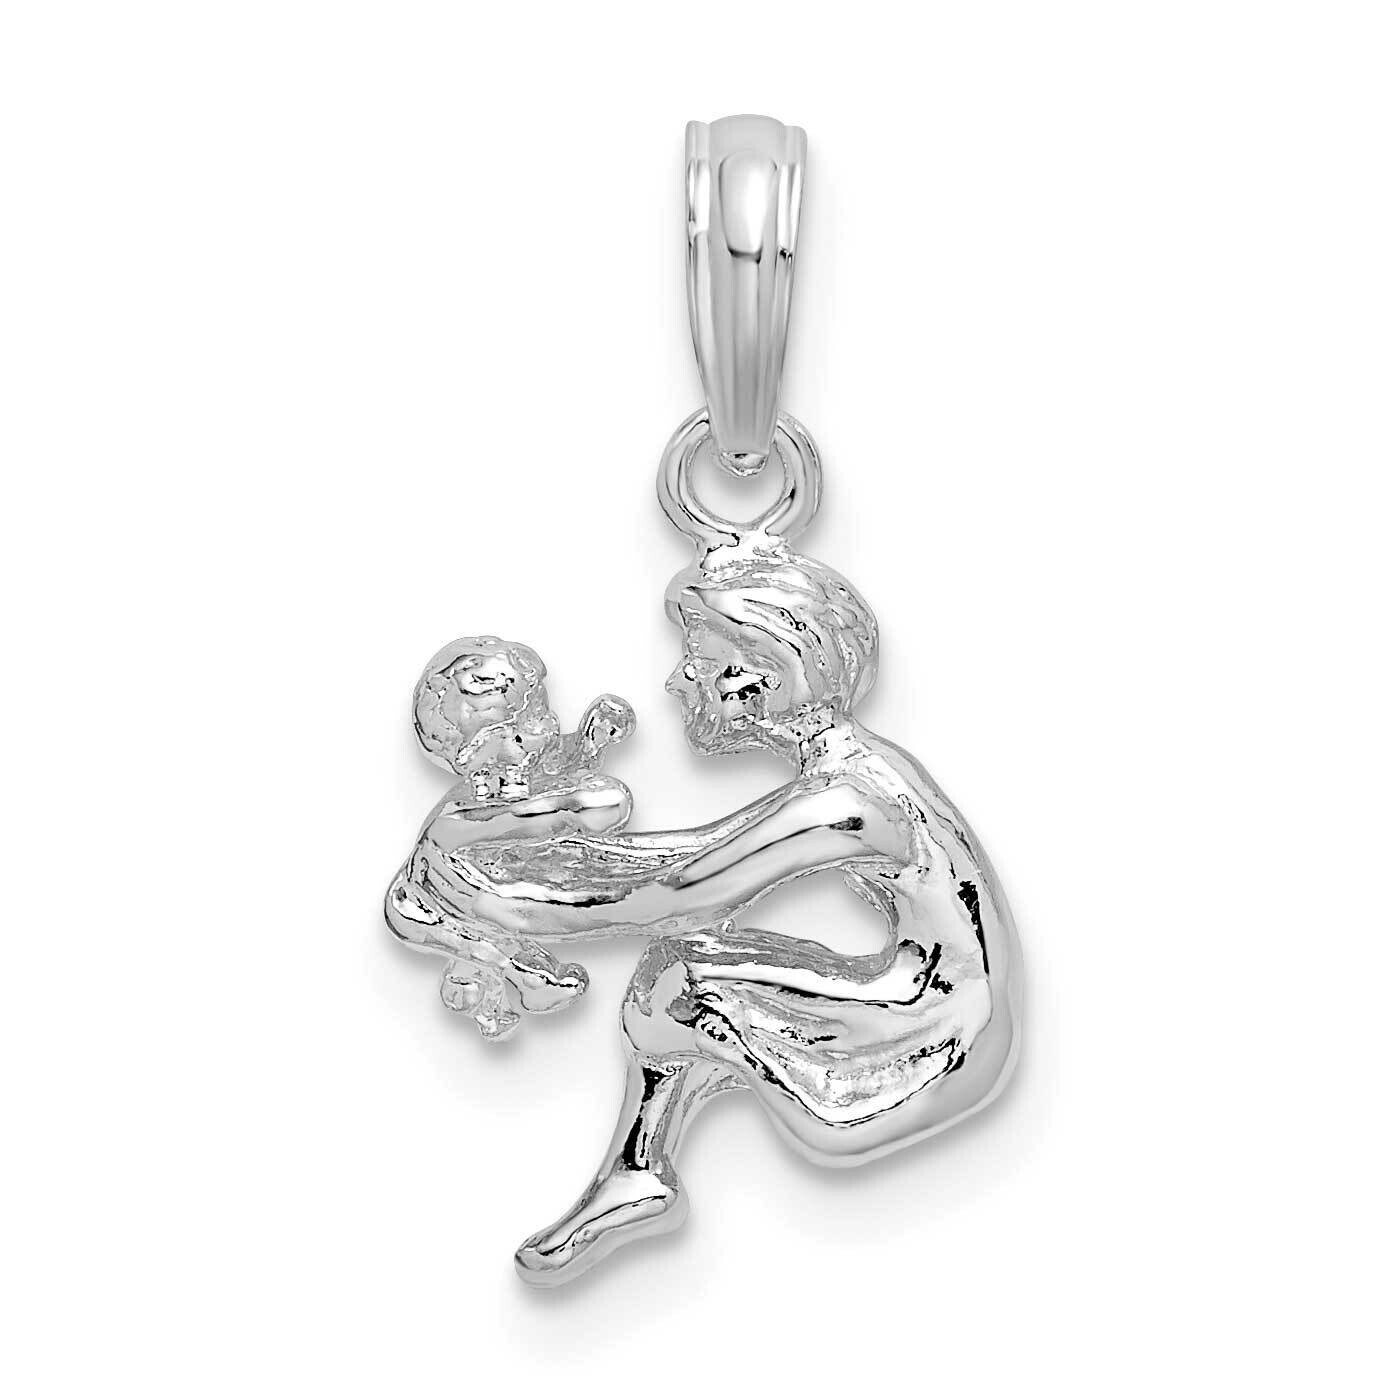 3D Mother Baby Pendant Sterling Silver Polished QC10615